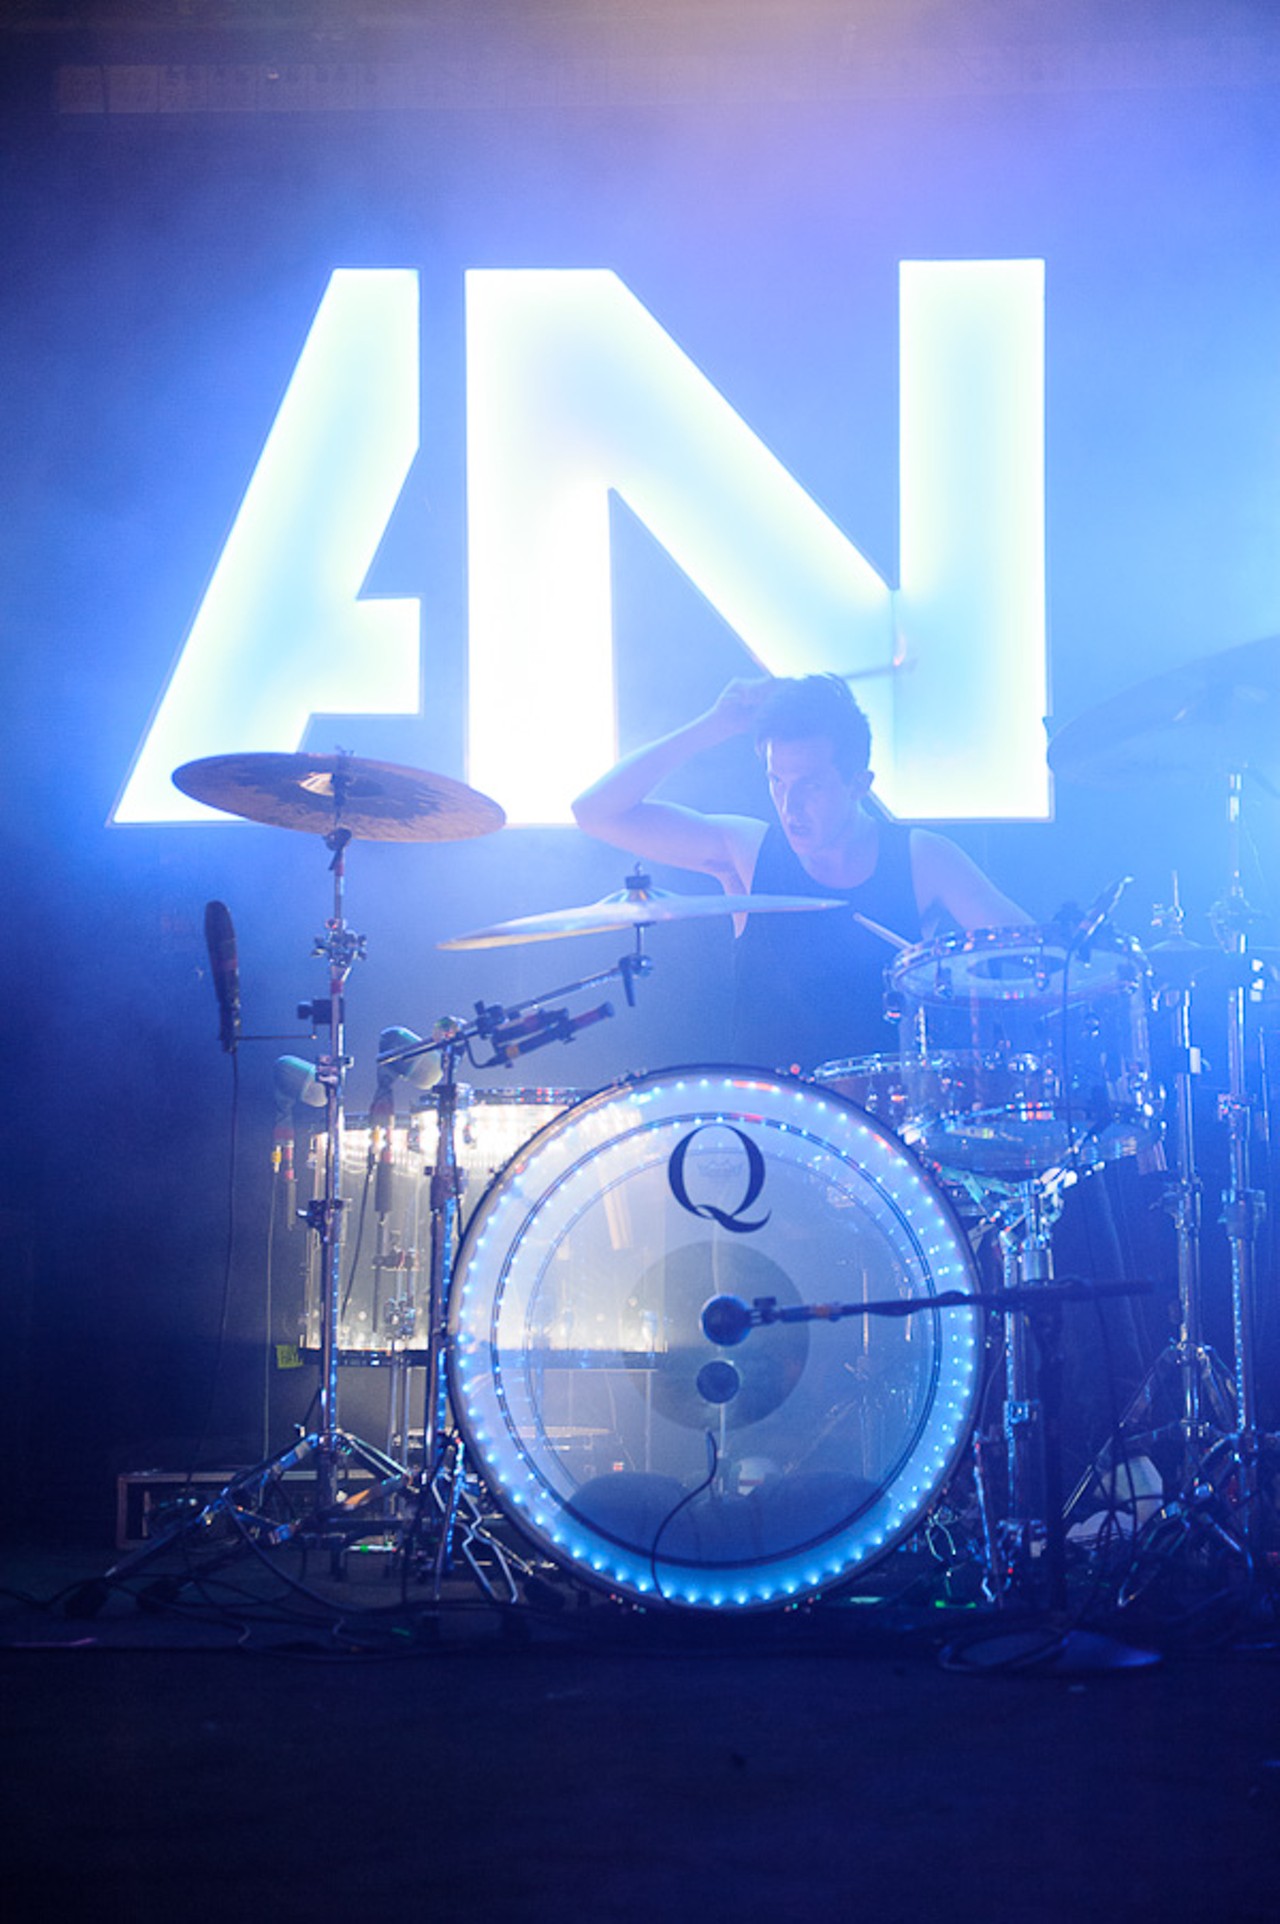 AWOLNATION performing at Pop's in Sauget, Illinois, on January 21, 2012.